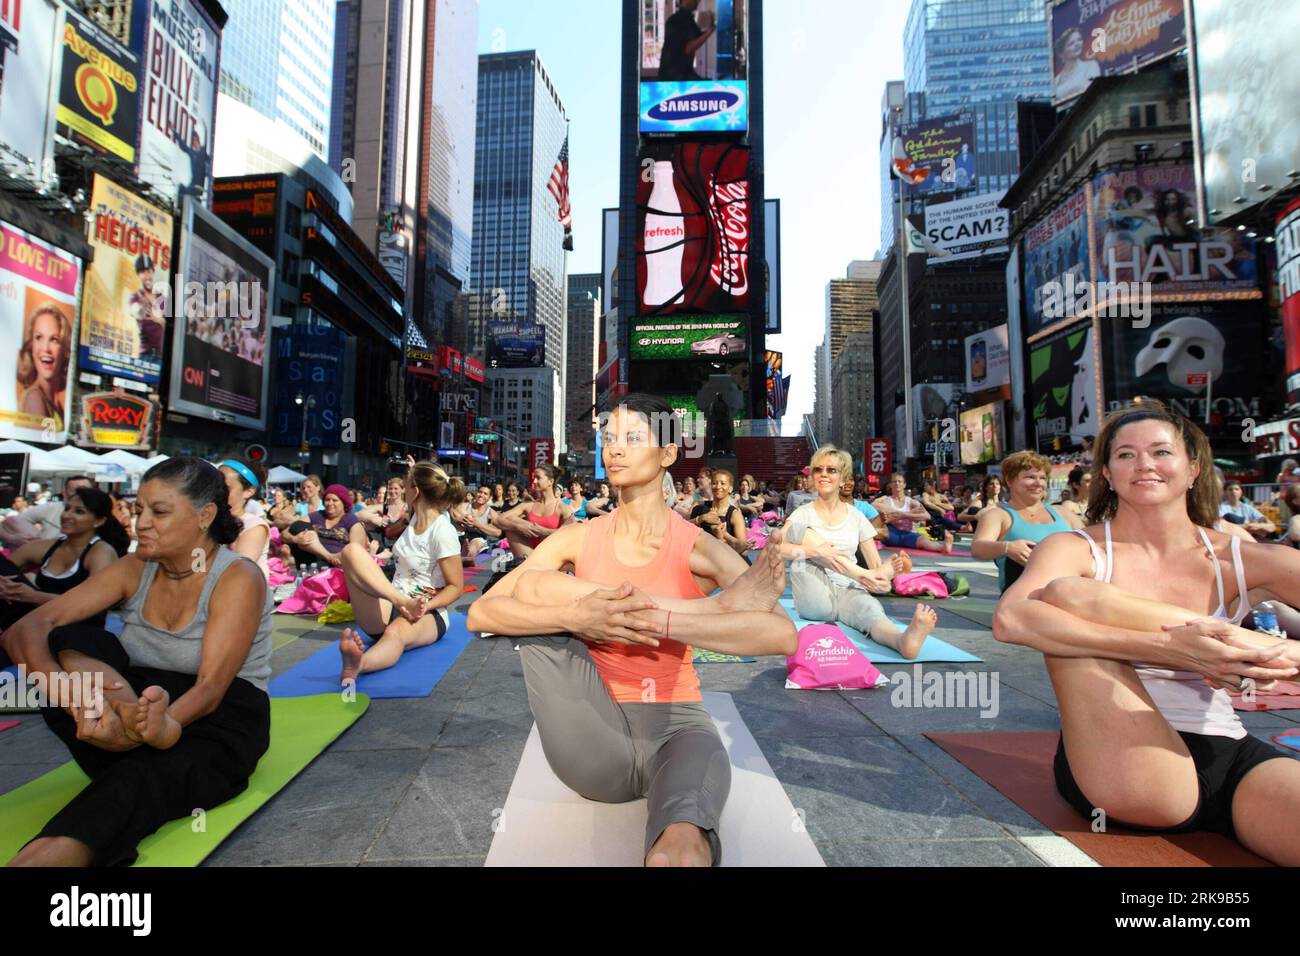 Bildnummer: 54158701  Datum: 21.06.2010  Copyright: imago/Xinhua (100621) -- NEW YORK, June 21, 2010 (Xinhua) -- Yoga enthusiasts practise yoga on the morning of the summer solstice at Times Square in New York, the United State, June 21, 2010. Thousands of yoga enthusiasts got together during the eighth annual Solstice in Times Square event to celebrate the longest day of the year. (Xinhua/Liu Xin) (zw) (3)U.S.-NEW YORK-TIMES SQUARE-YOGA PUBLICATIONxNOTxINxCHN Gesellschaft Freizeitsport Yoga Sommersonnenwende kurios premiumd xint kbdig xsp 2010 quer  o0 Sonnenwende, Sonnwendfeier Körperkultur Stock Photo